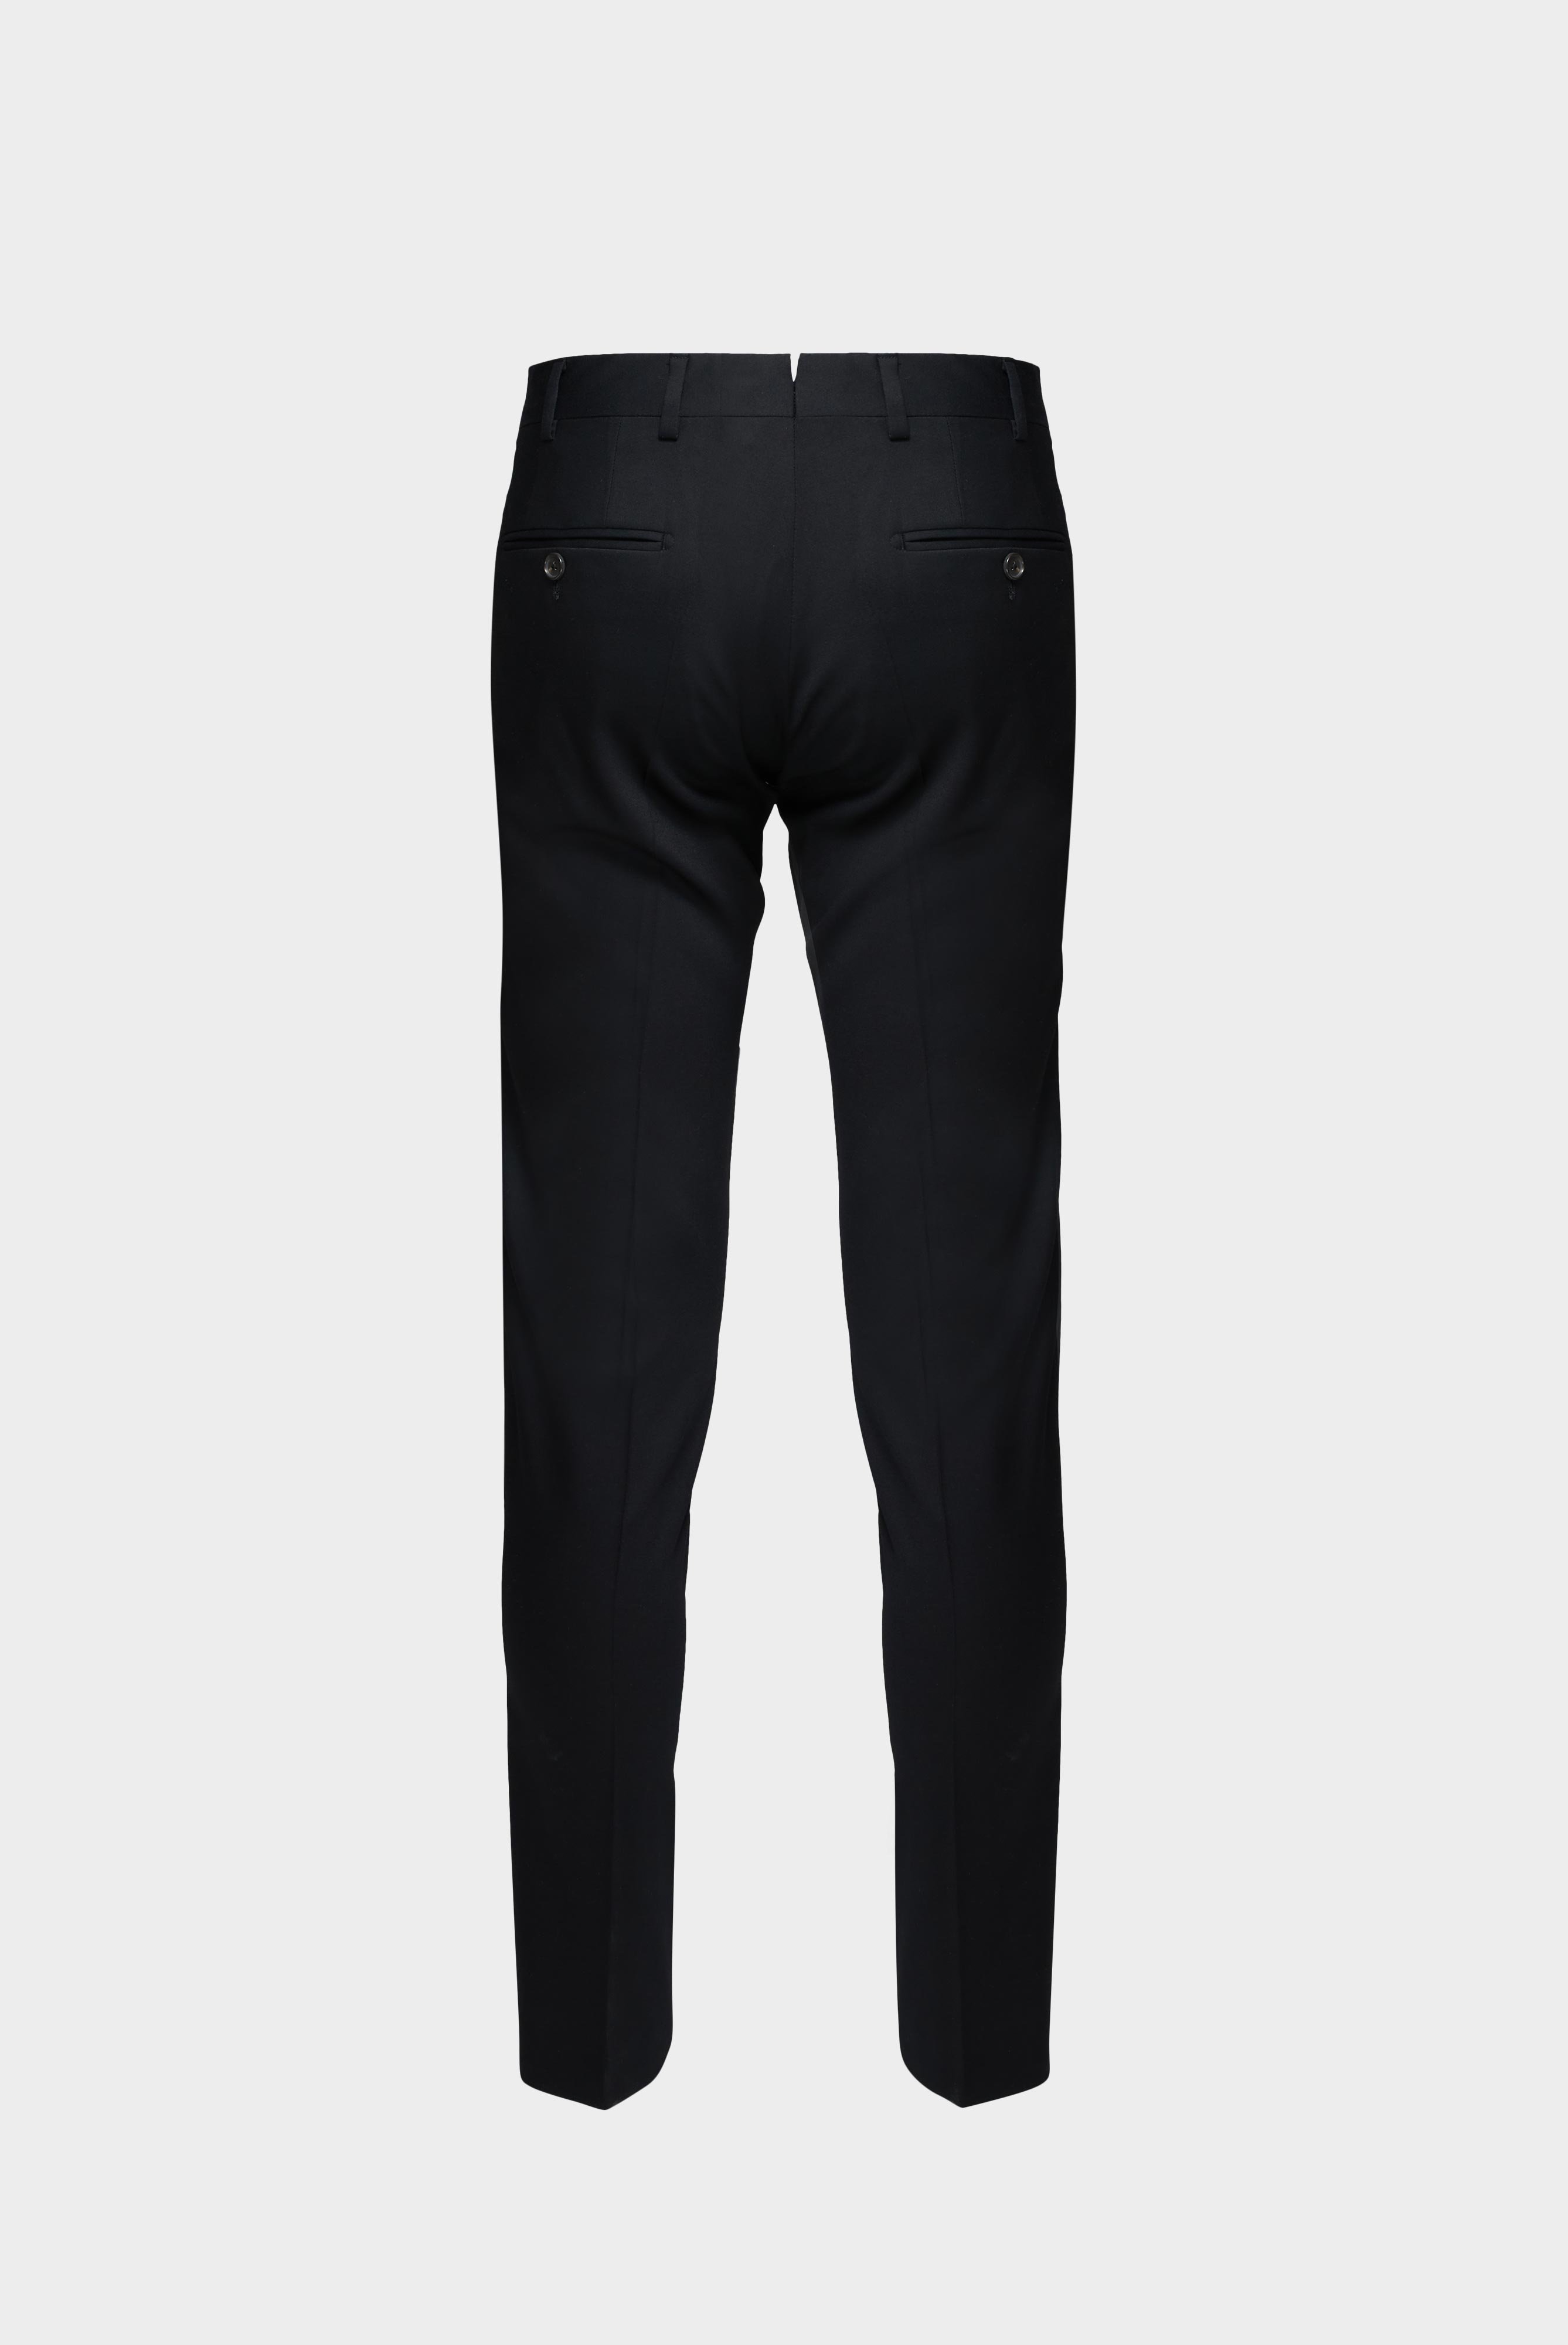 Jeans & Trousers+Wool Trousers Slim Fit+20.7880.16.H01010.099.50